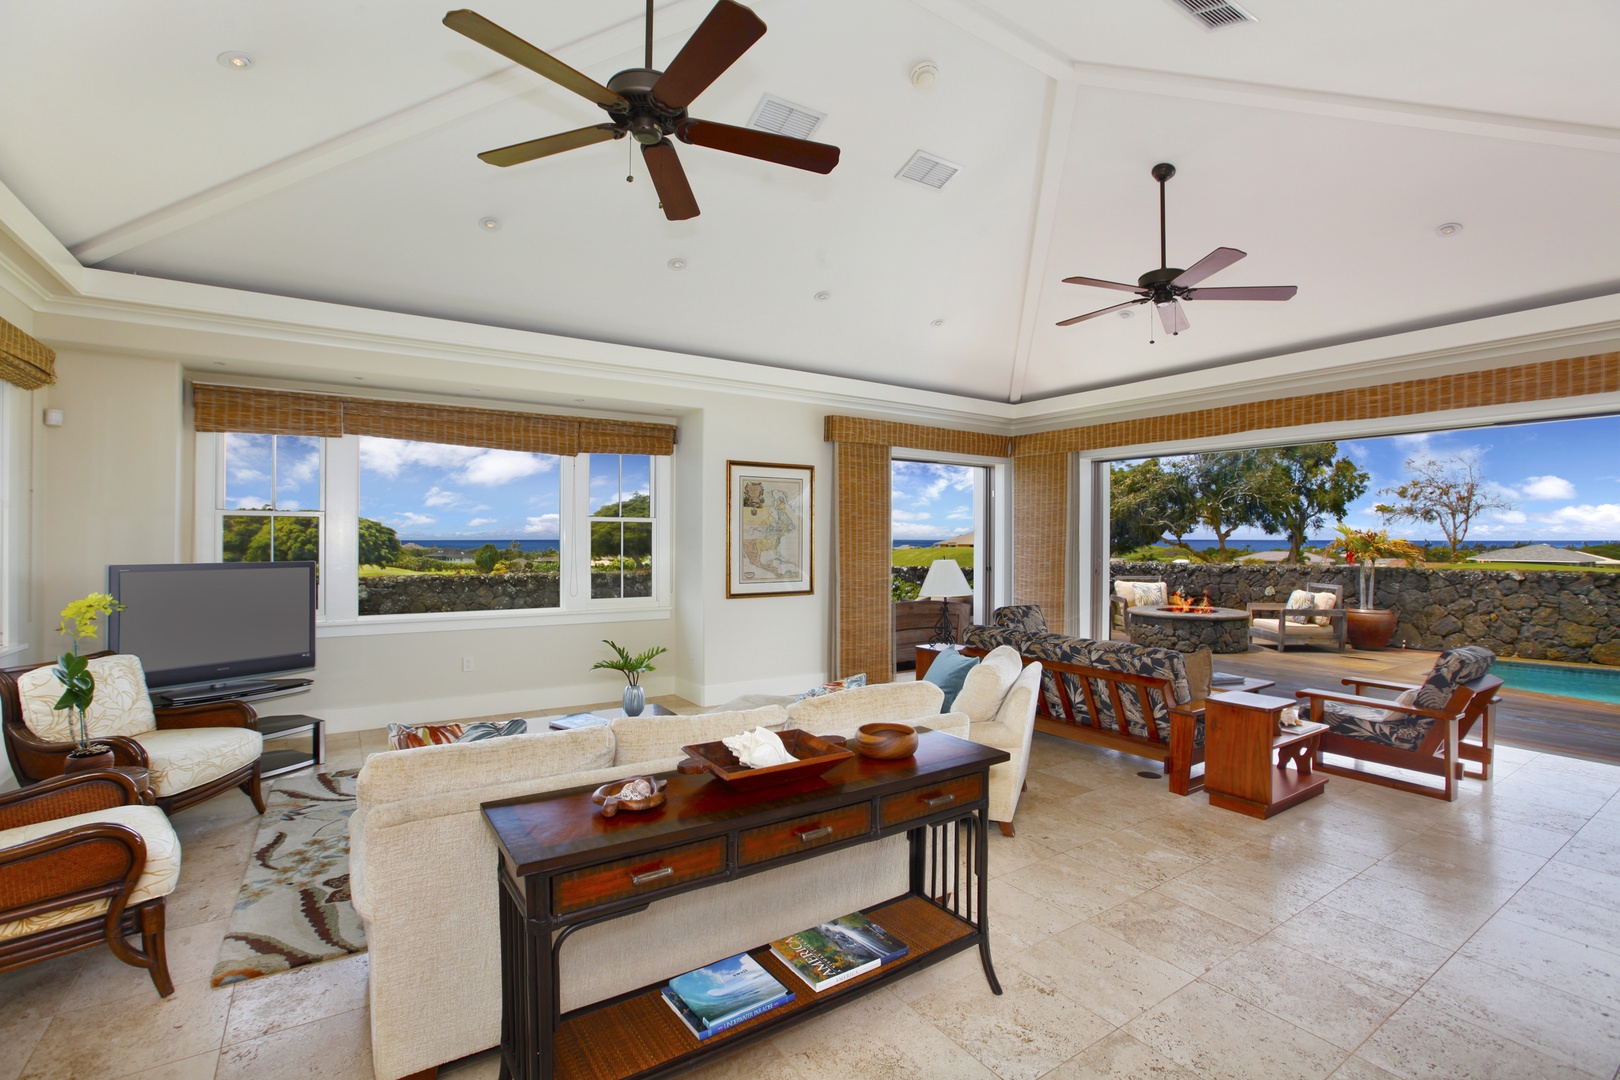 Koloa Vacation Rentals, Hale Luana at Poipu - Open living room with ocean view